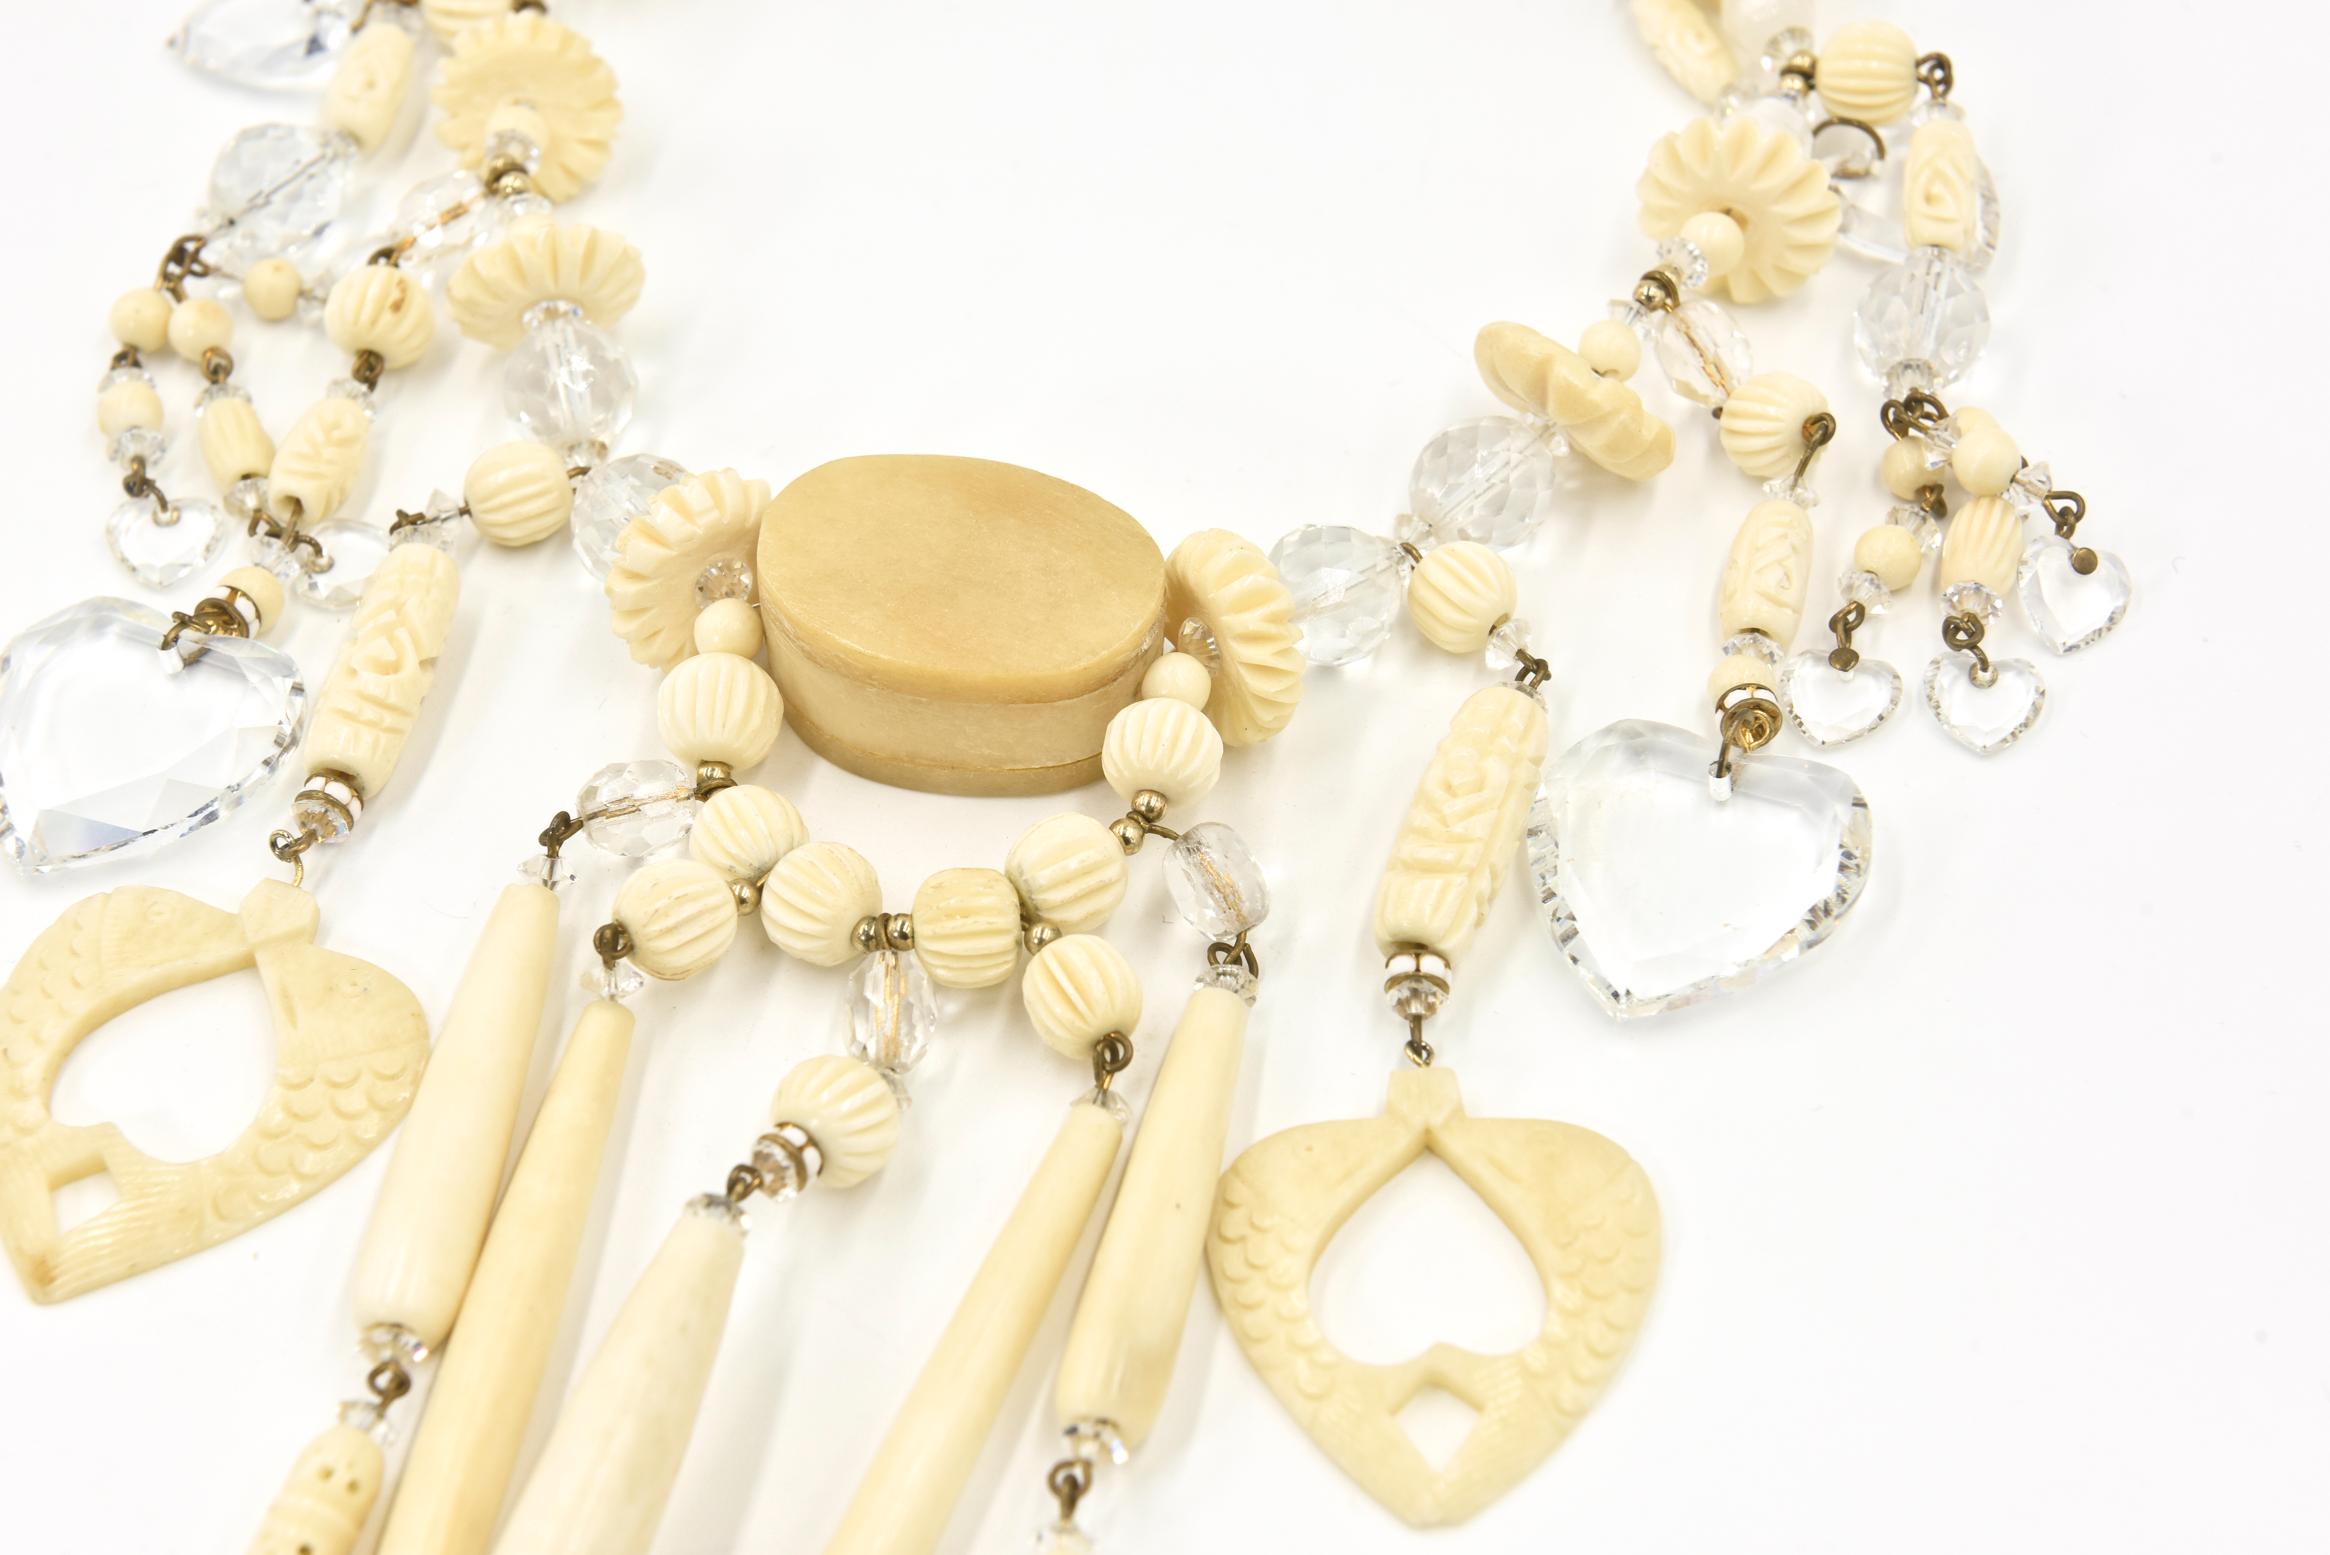 Bohemian Chic Carved Bone and Lucite Hearts Bib Necklace with Dangling Earrings  For Sale 1